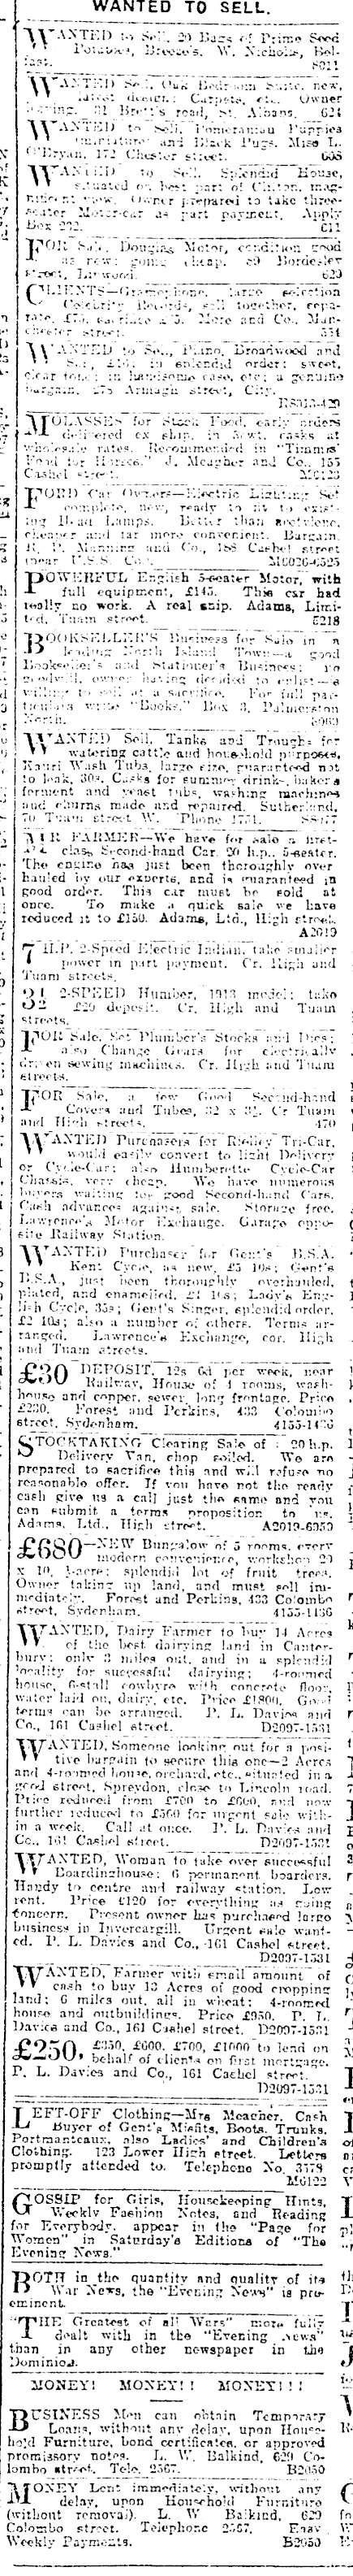 Papers Past Newspapers Press 10 November 1915 Page 9 Advertisements Column 4